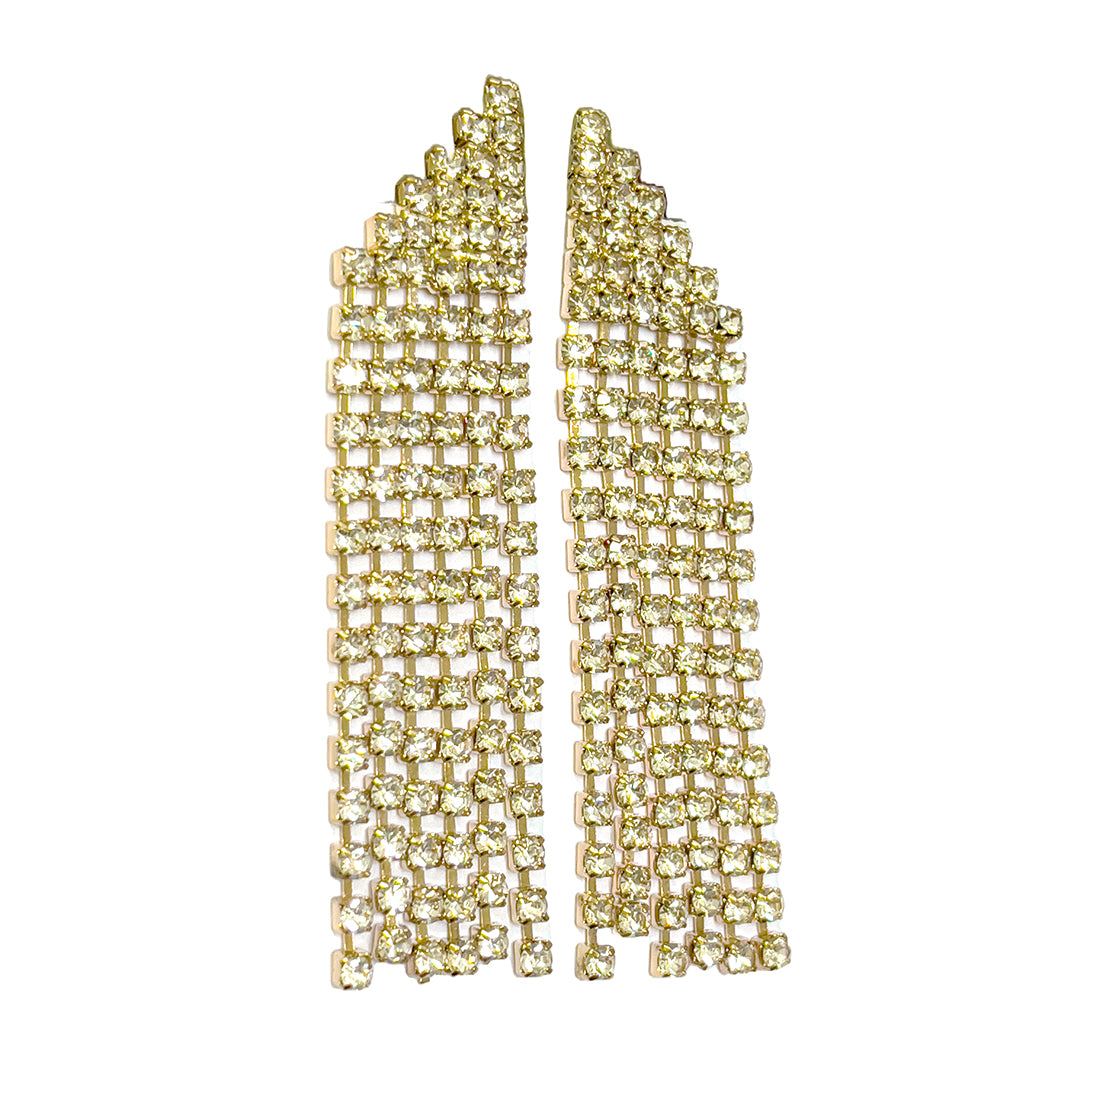 Ayesha Contemporary White Diamante Crystal Studded Gold-Toned Triangular Tassel Drop Earrings